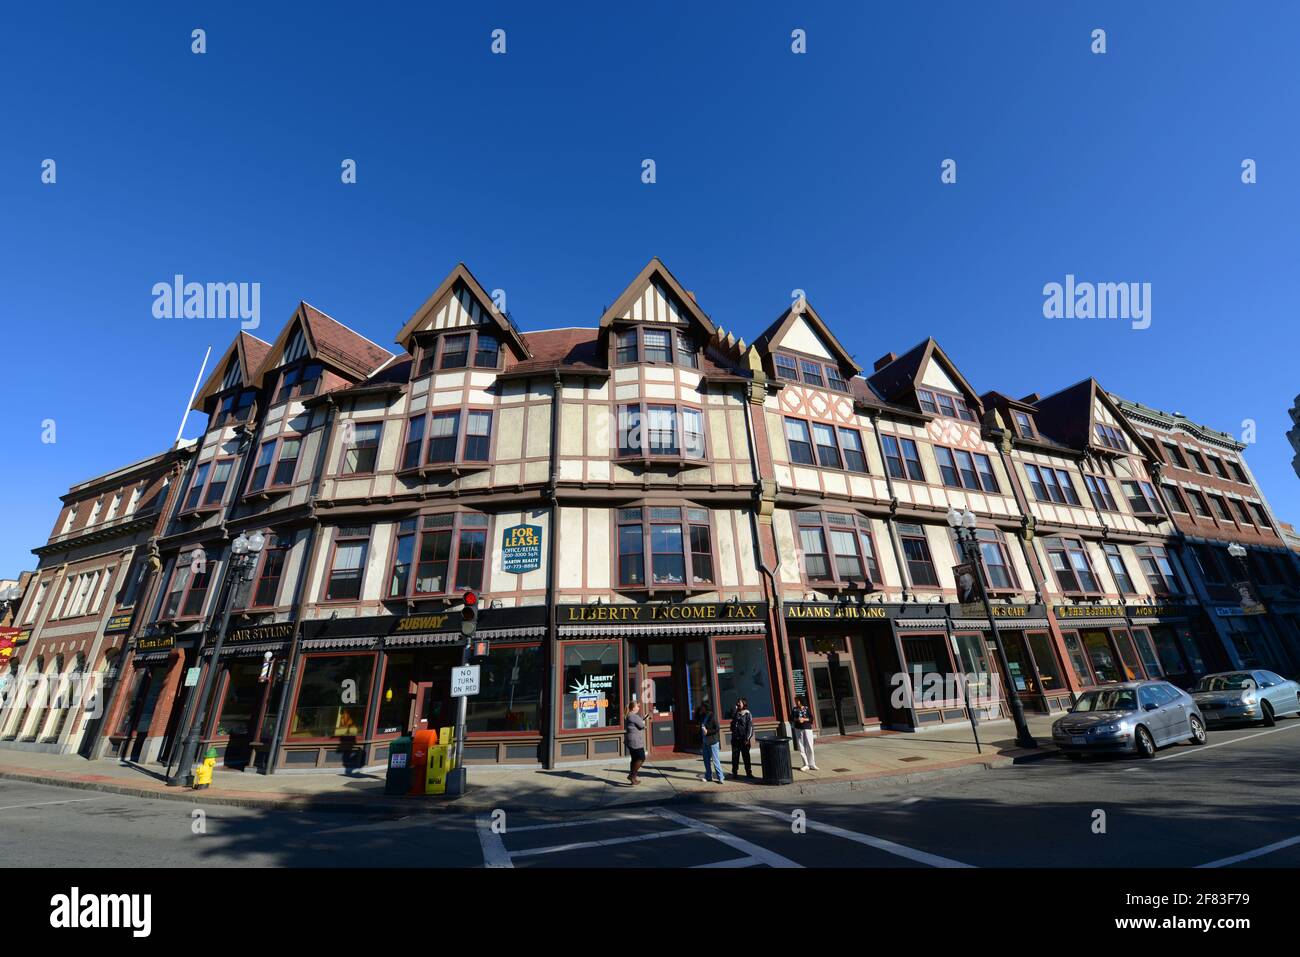 Adams Building, built in 1880, is a historical commercial building with Tudor Revival style at Hancock Street in downtown Quincy, Massachusetts MA, US Stock Photo